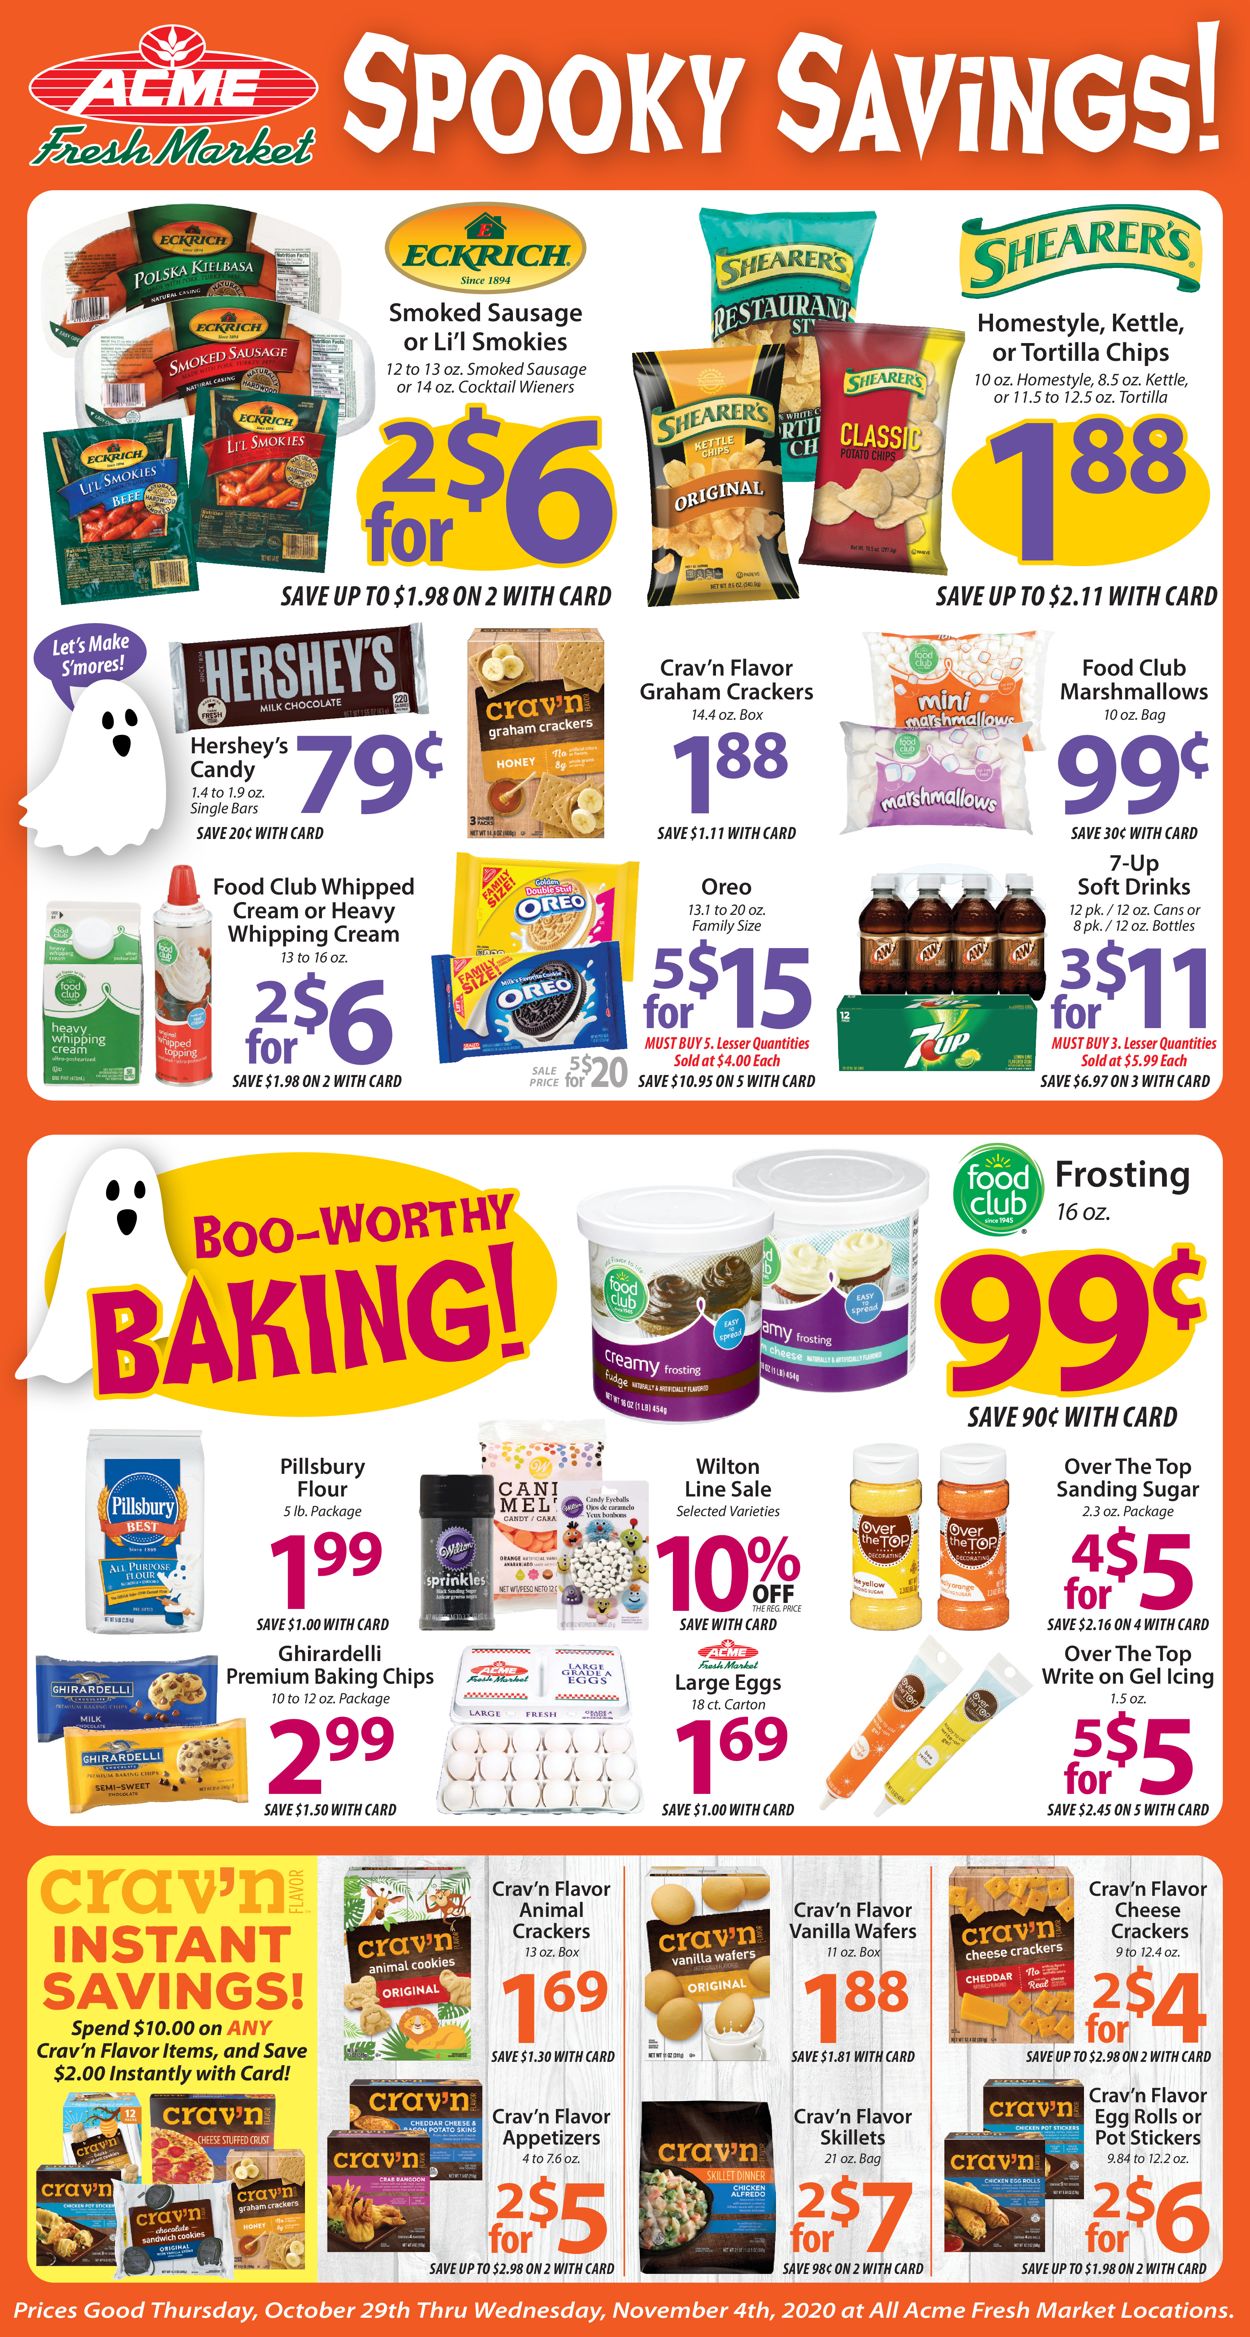 Acme Fresh Market Current weekly ad 10/29 - 11/04/2020 [3] - frequent ...